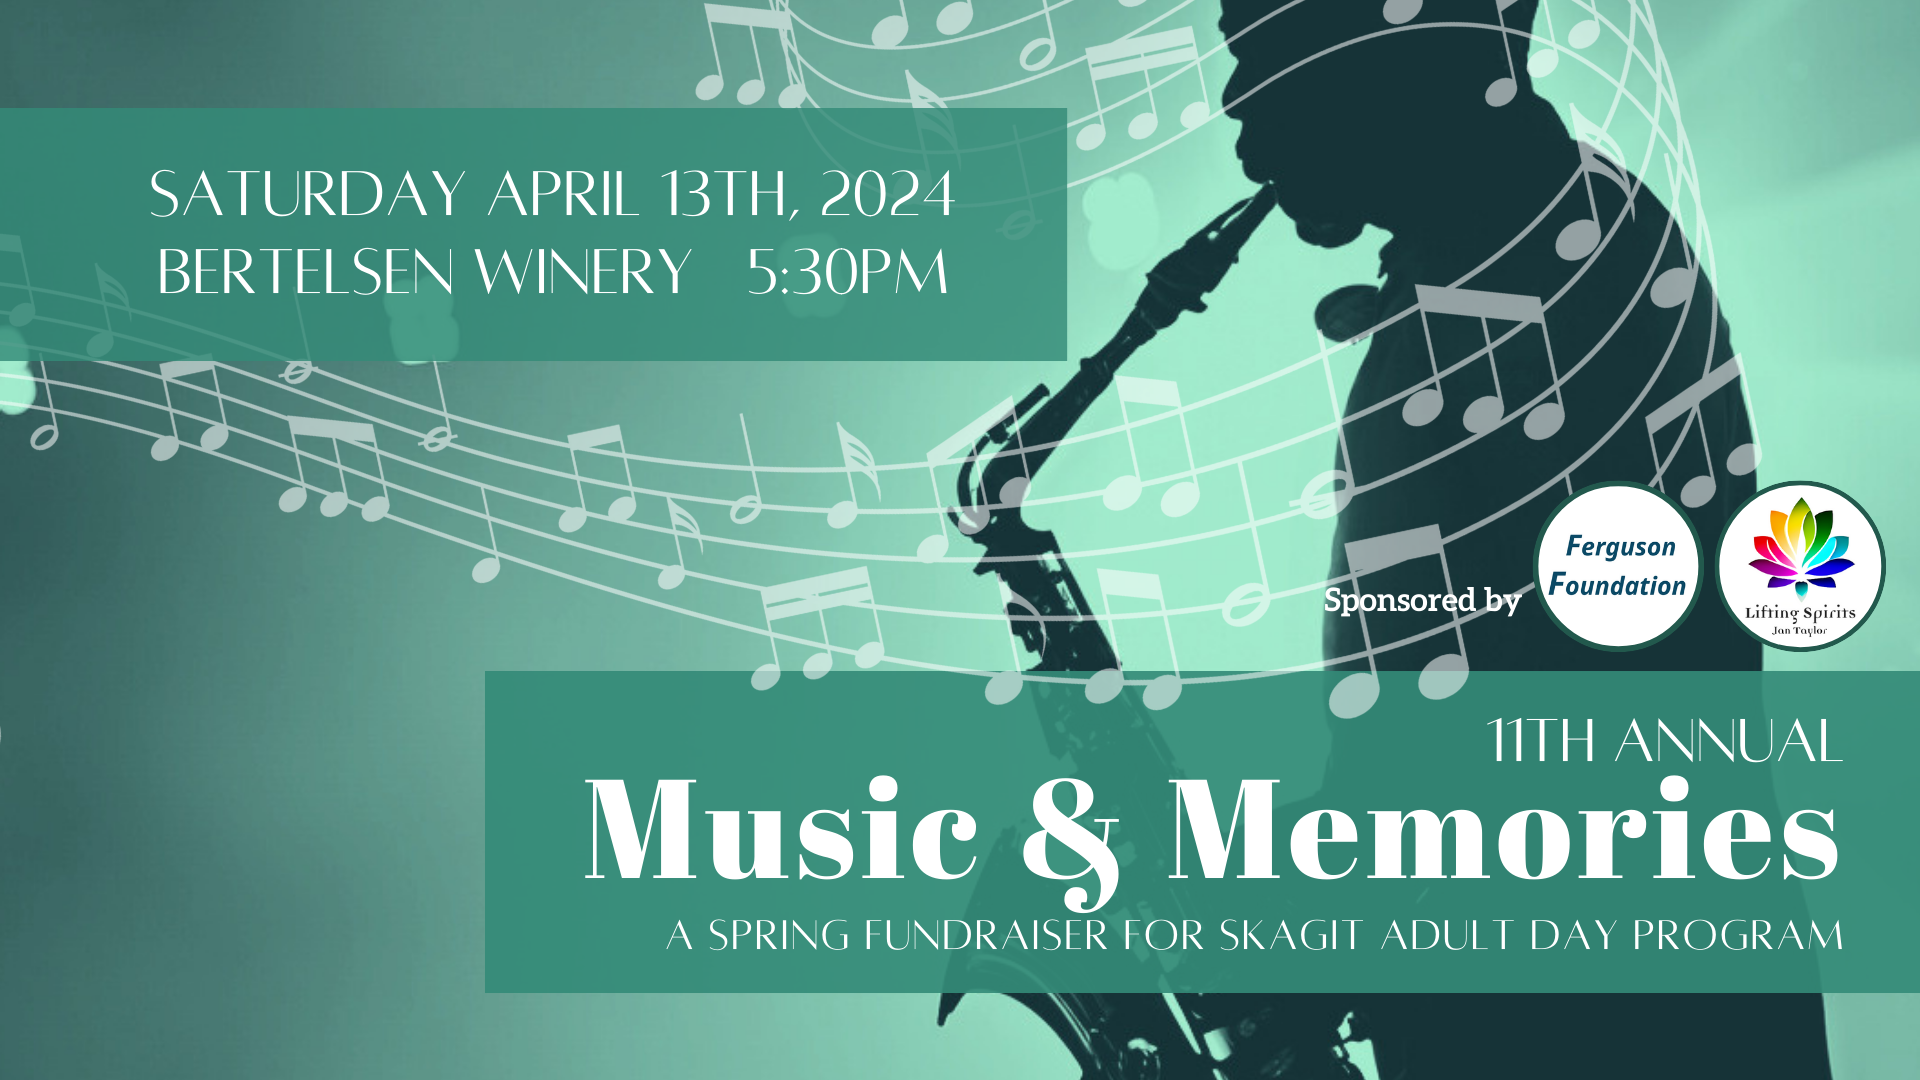 picture depicting a saxophone player with the text 11th annual music and memories A Spring fundraiser April 13th 2024 at Bertelsen Winery